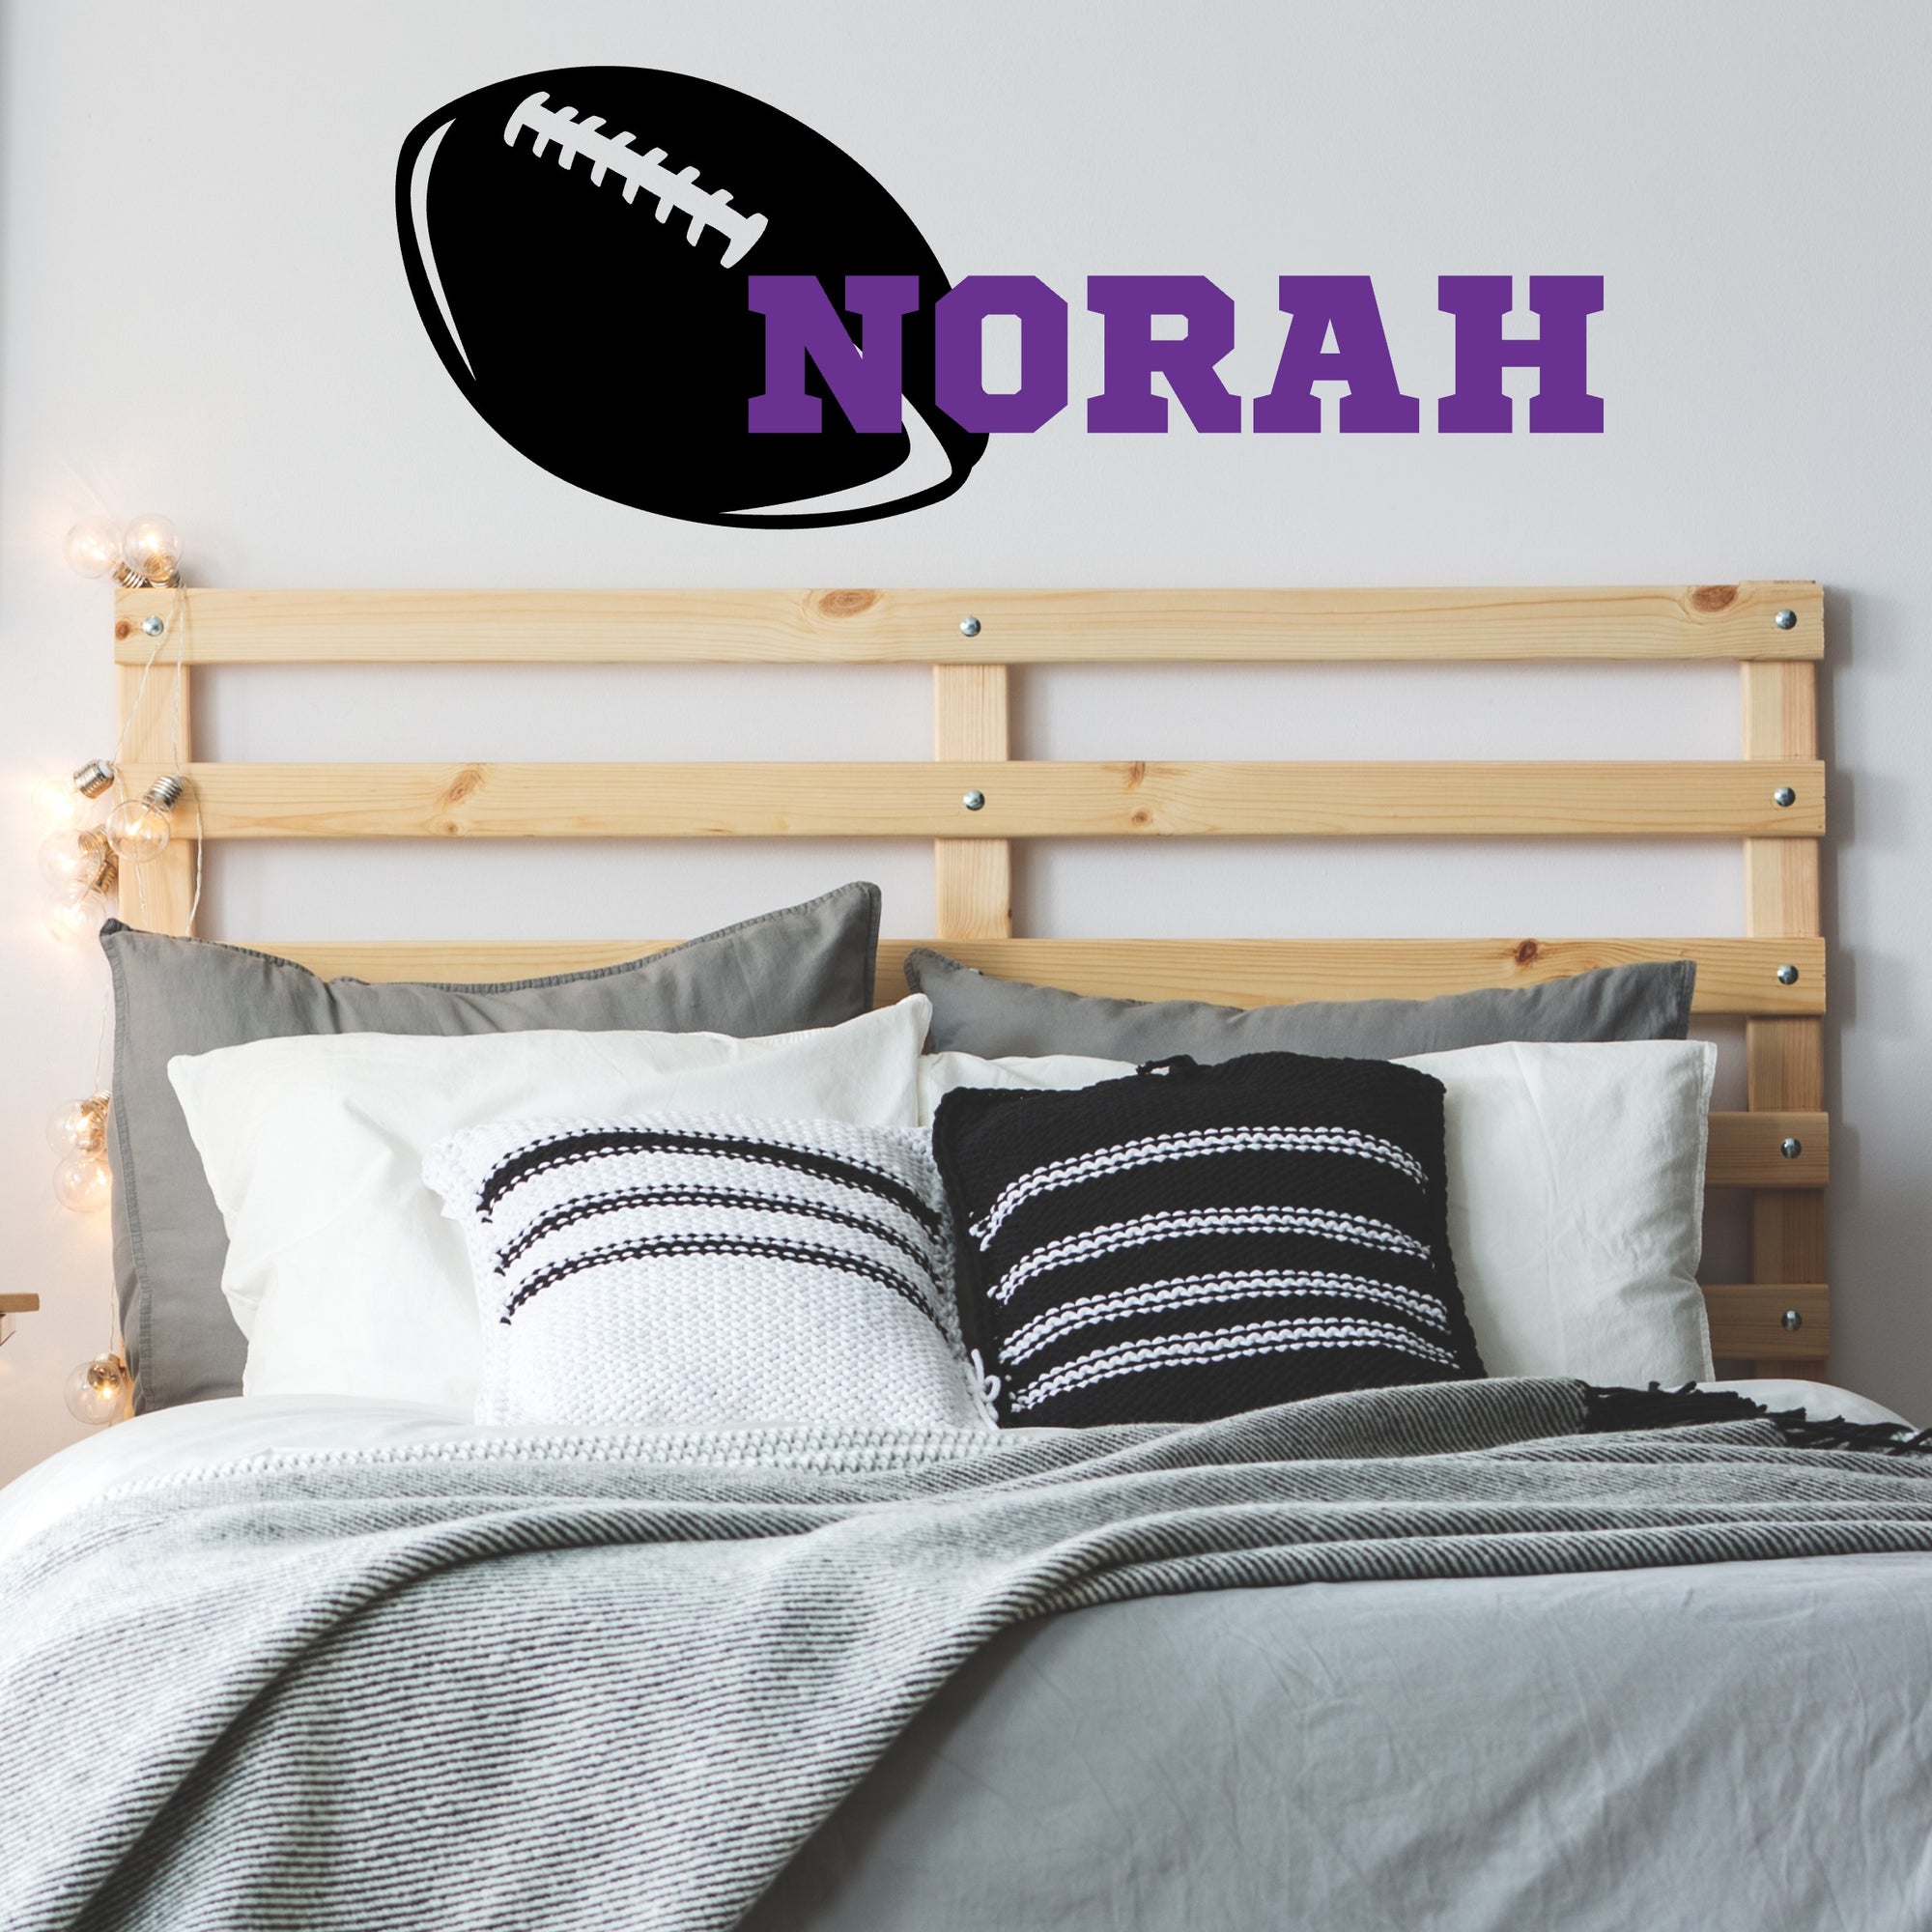 Football Wall Decal with Name - Personalized Gift for Football Player